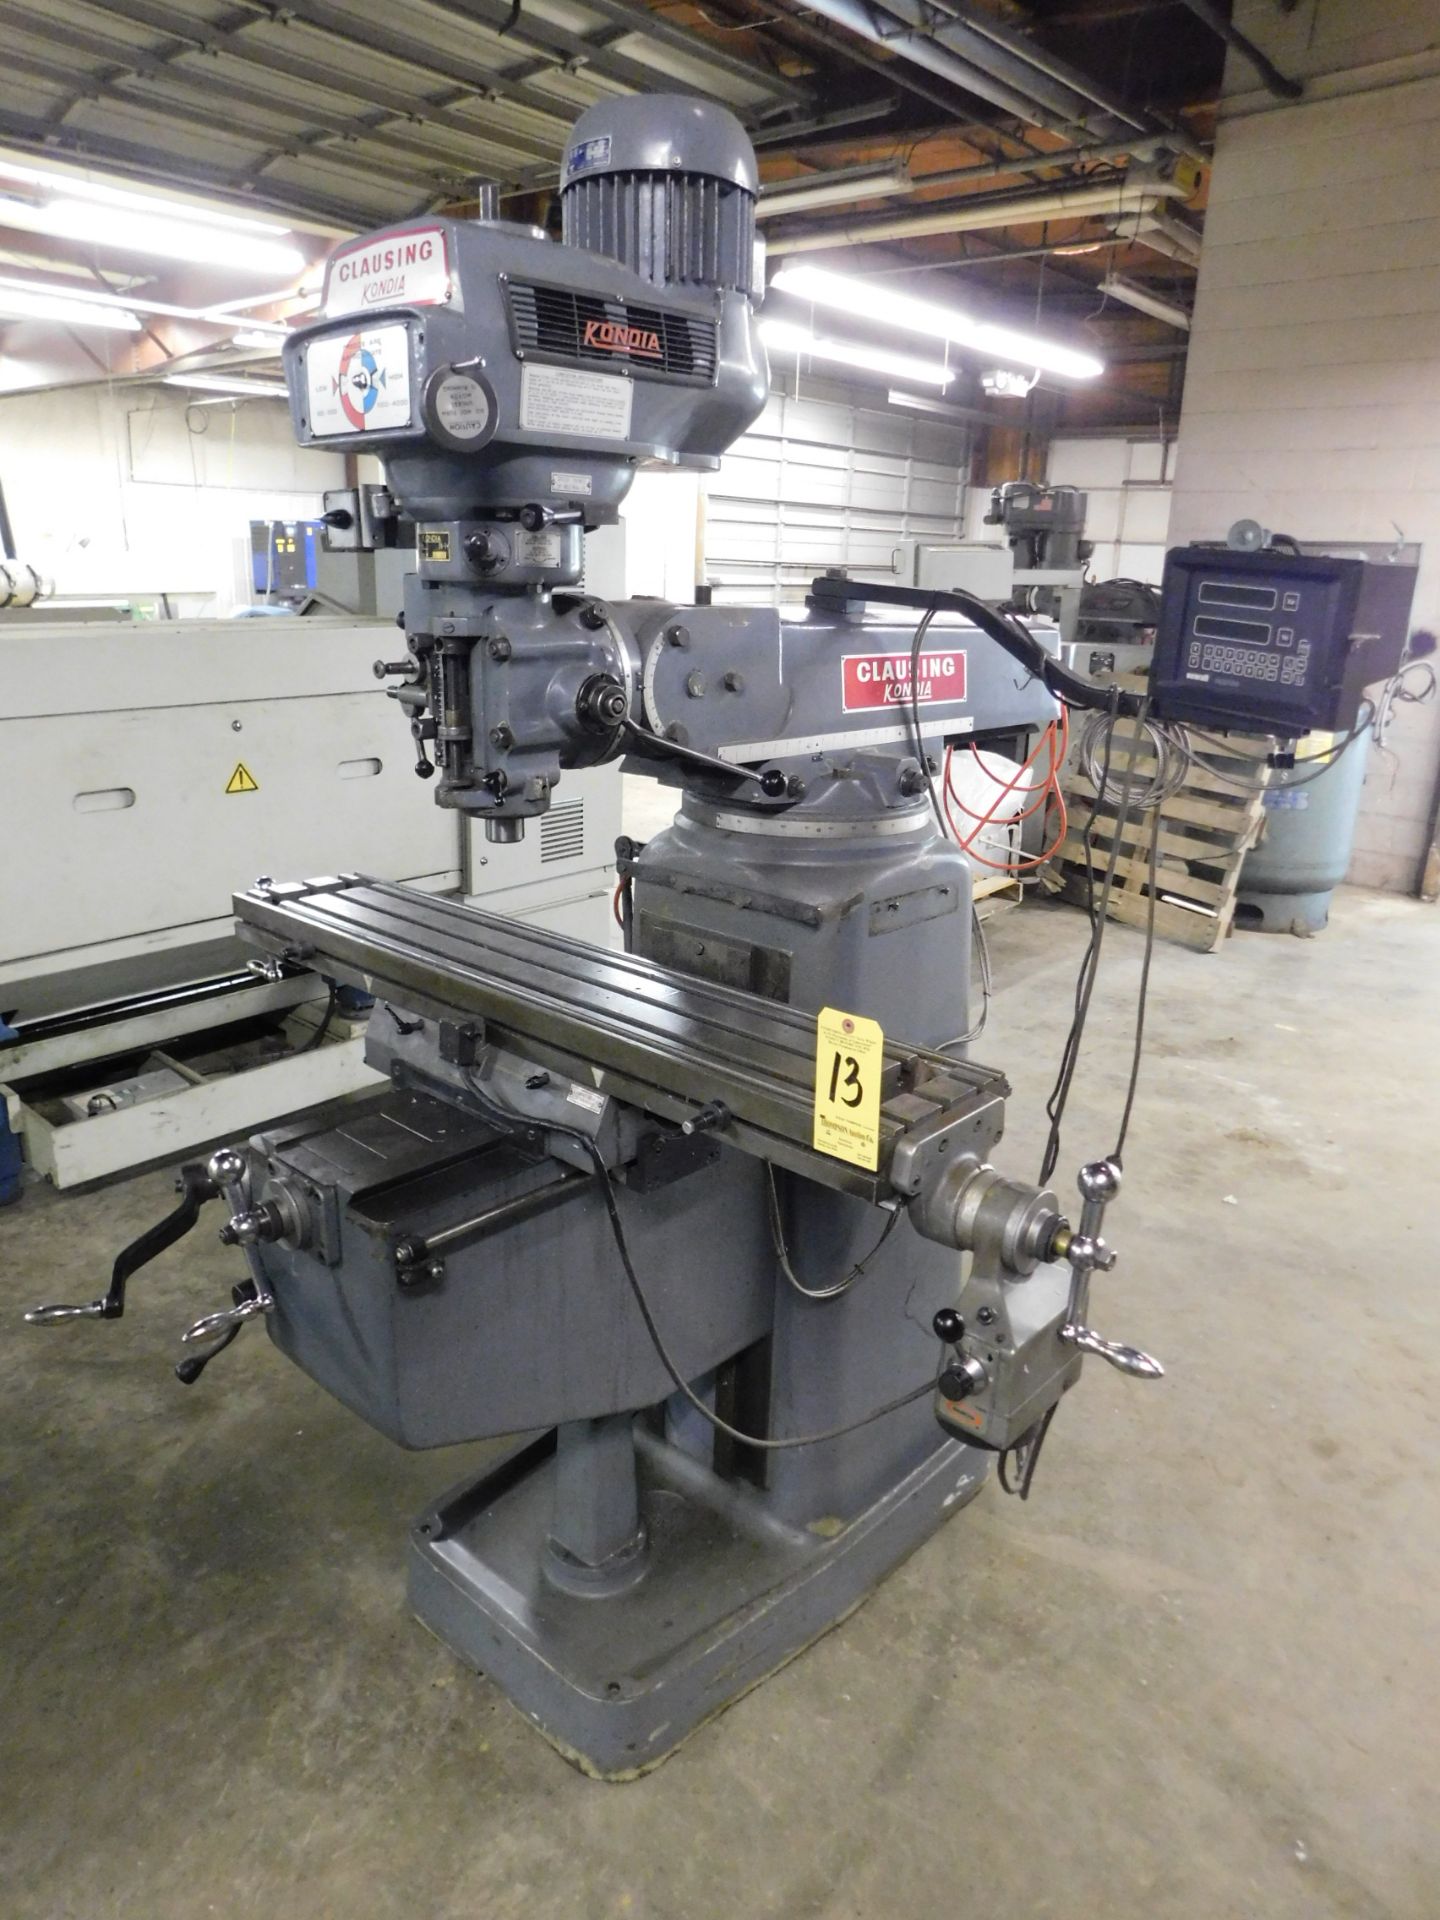 Clausing Kondia FV-1 Variable Speed Vertical Mill SN X-86, Servo Table Powerfeed, 9" x 48" Table,